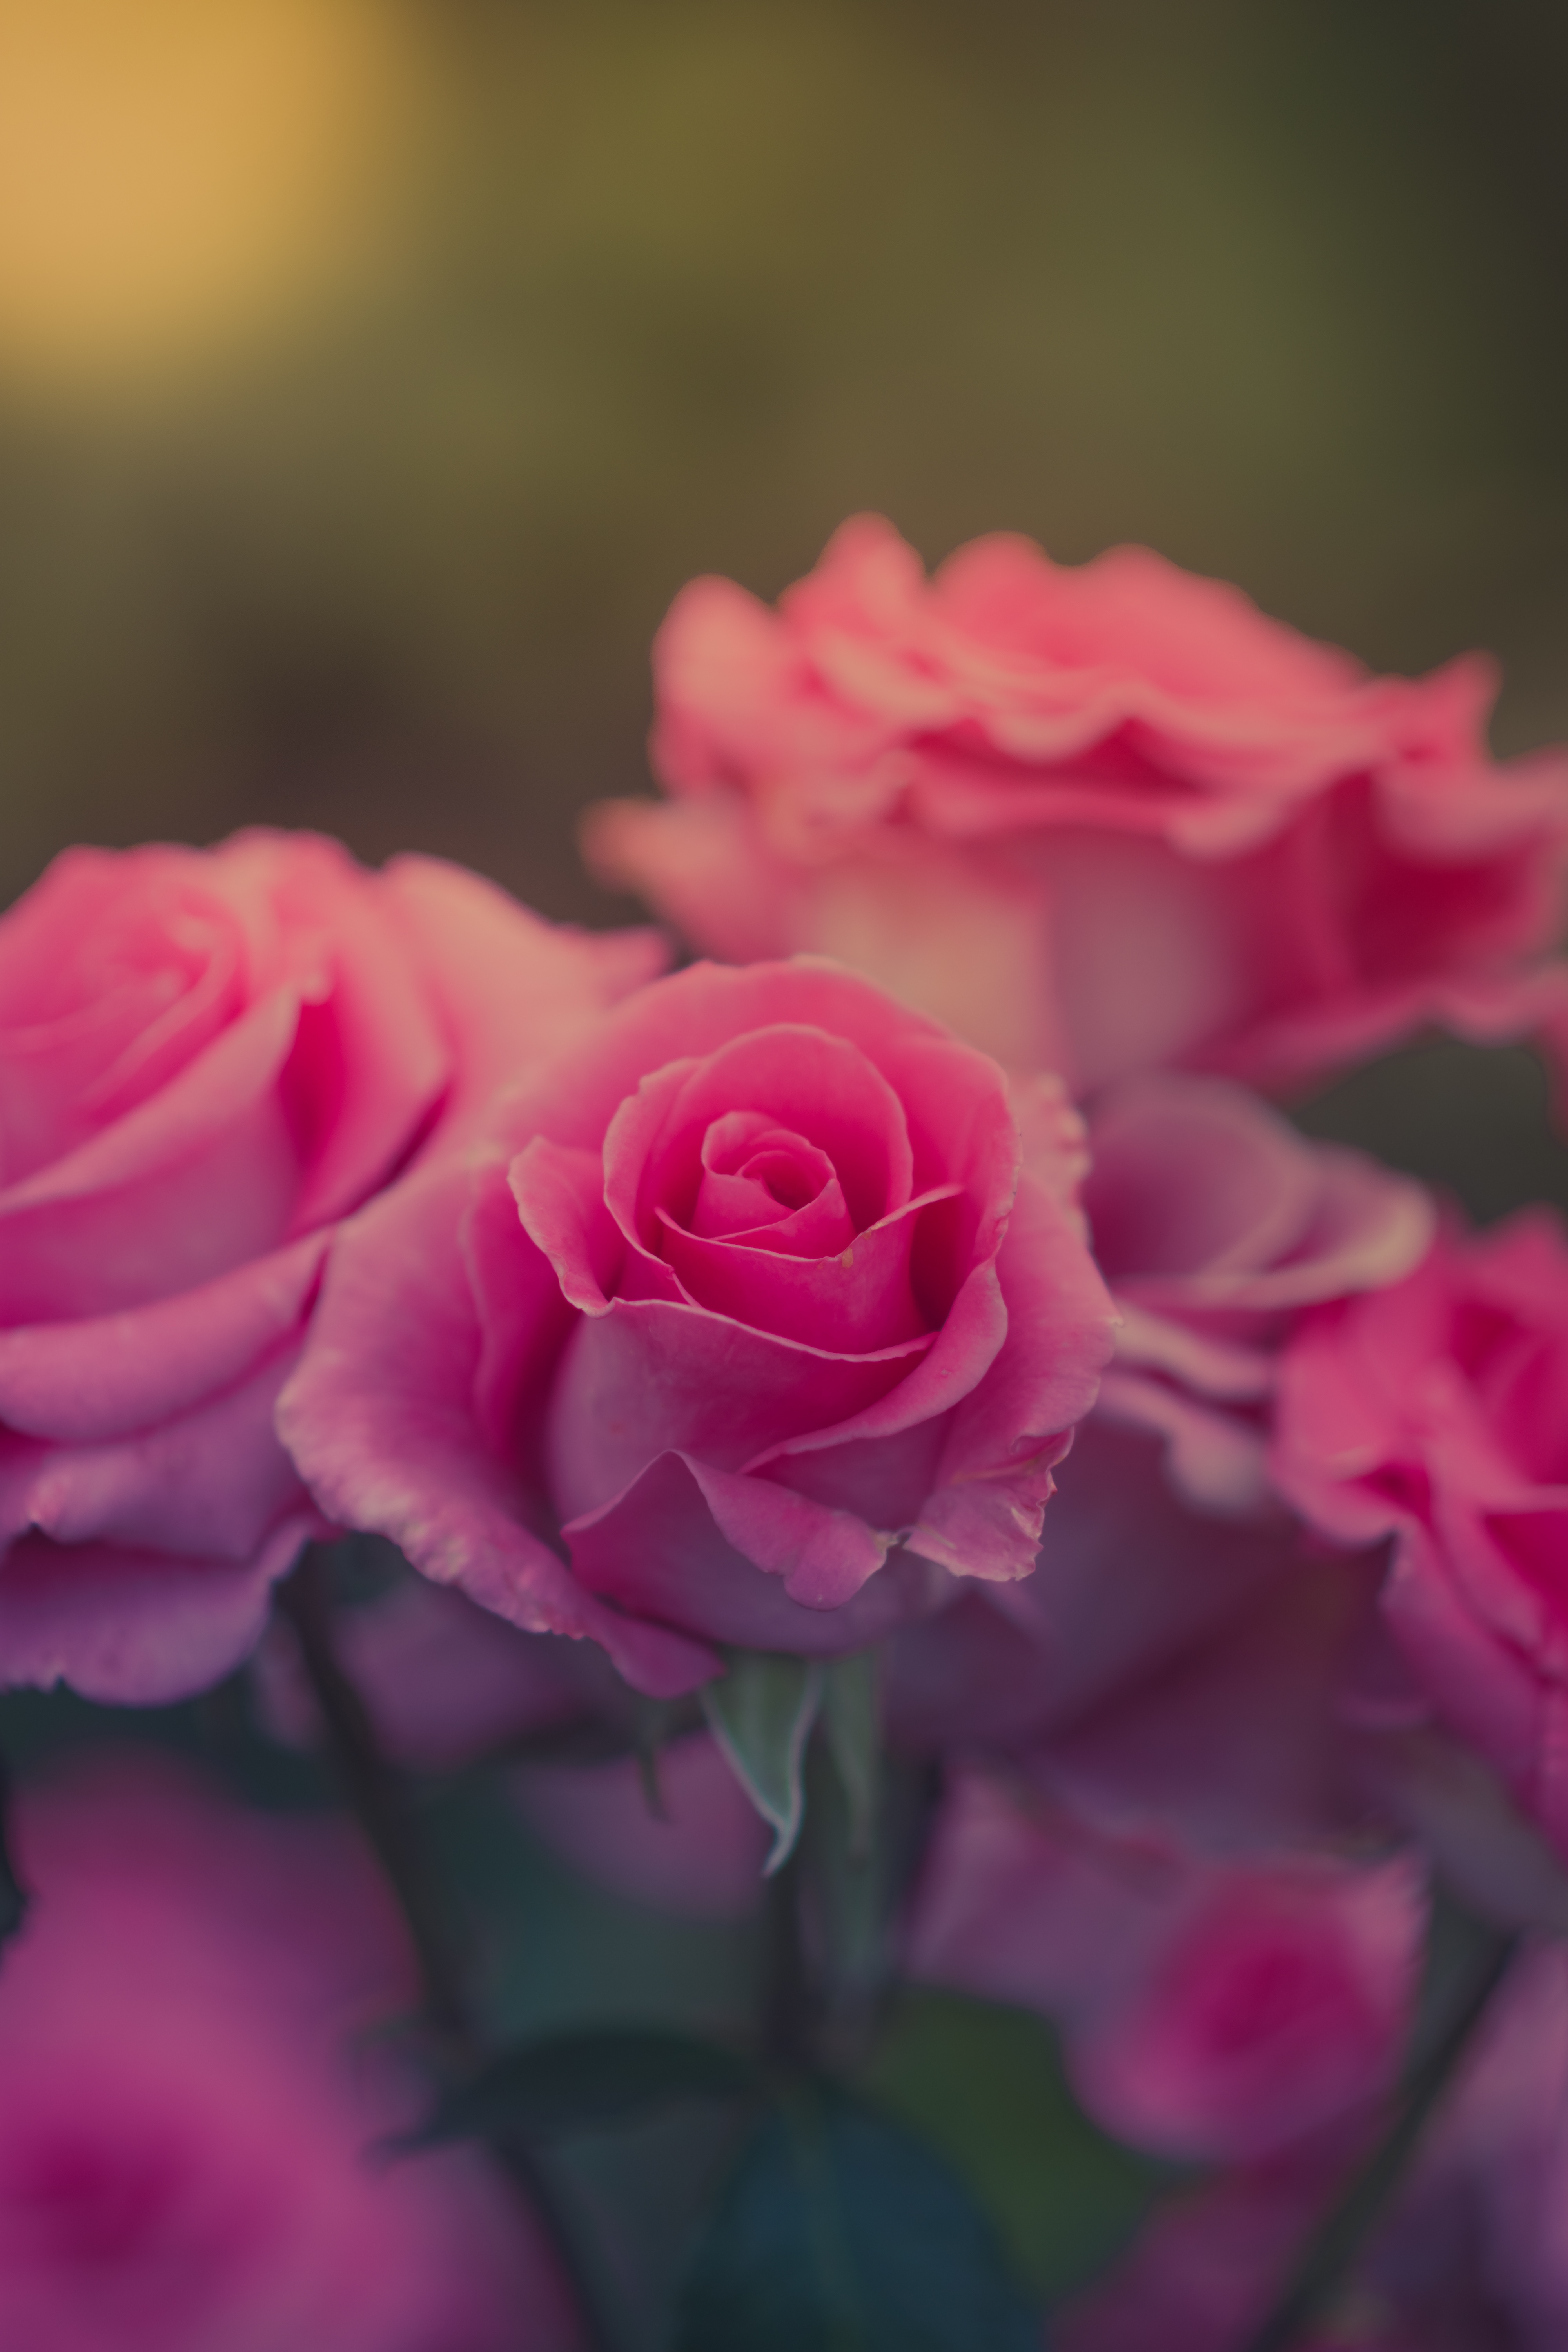 General 4000x6000 nature flowers pink flowers rose blurred plants